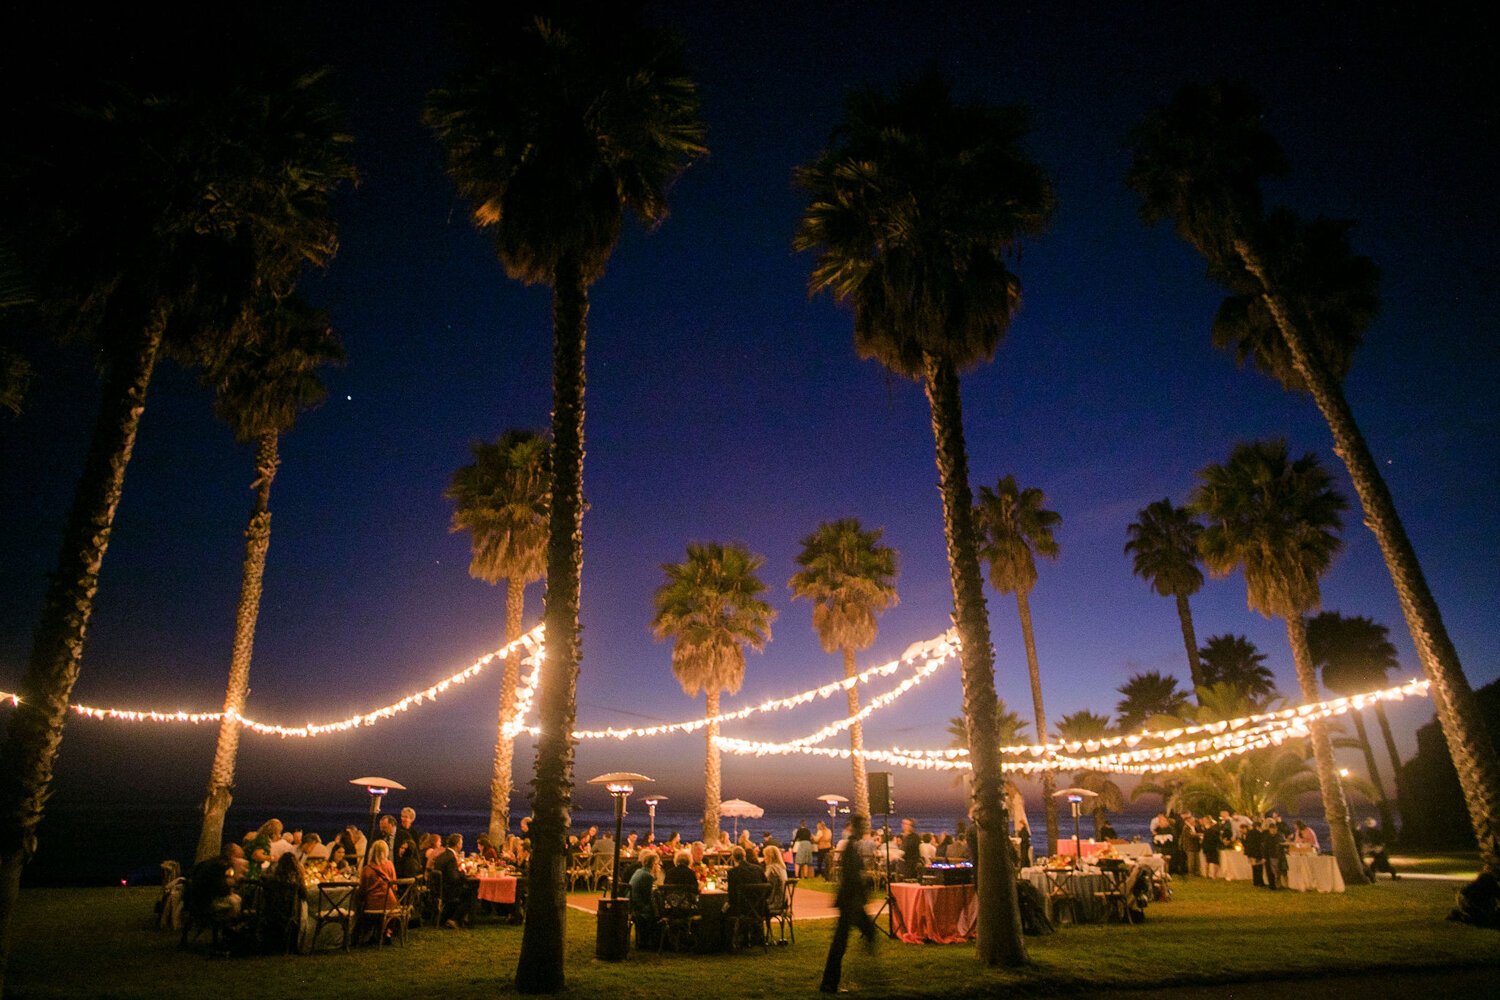 www.santabarbarawedding.com | Nightingale Photography | Rancho Dos Pueblos | Wild Hearts Events | Knot Just Flowers | This Good Mood | Reception at Night with String Lights